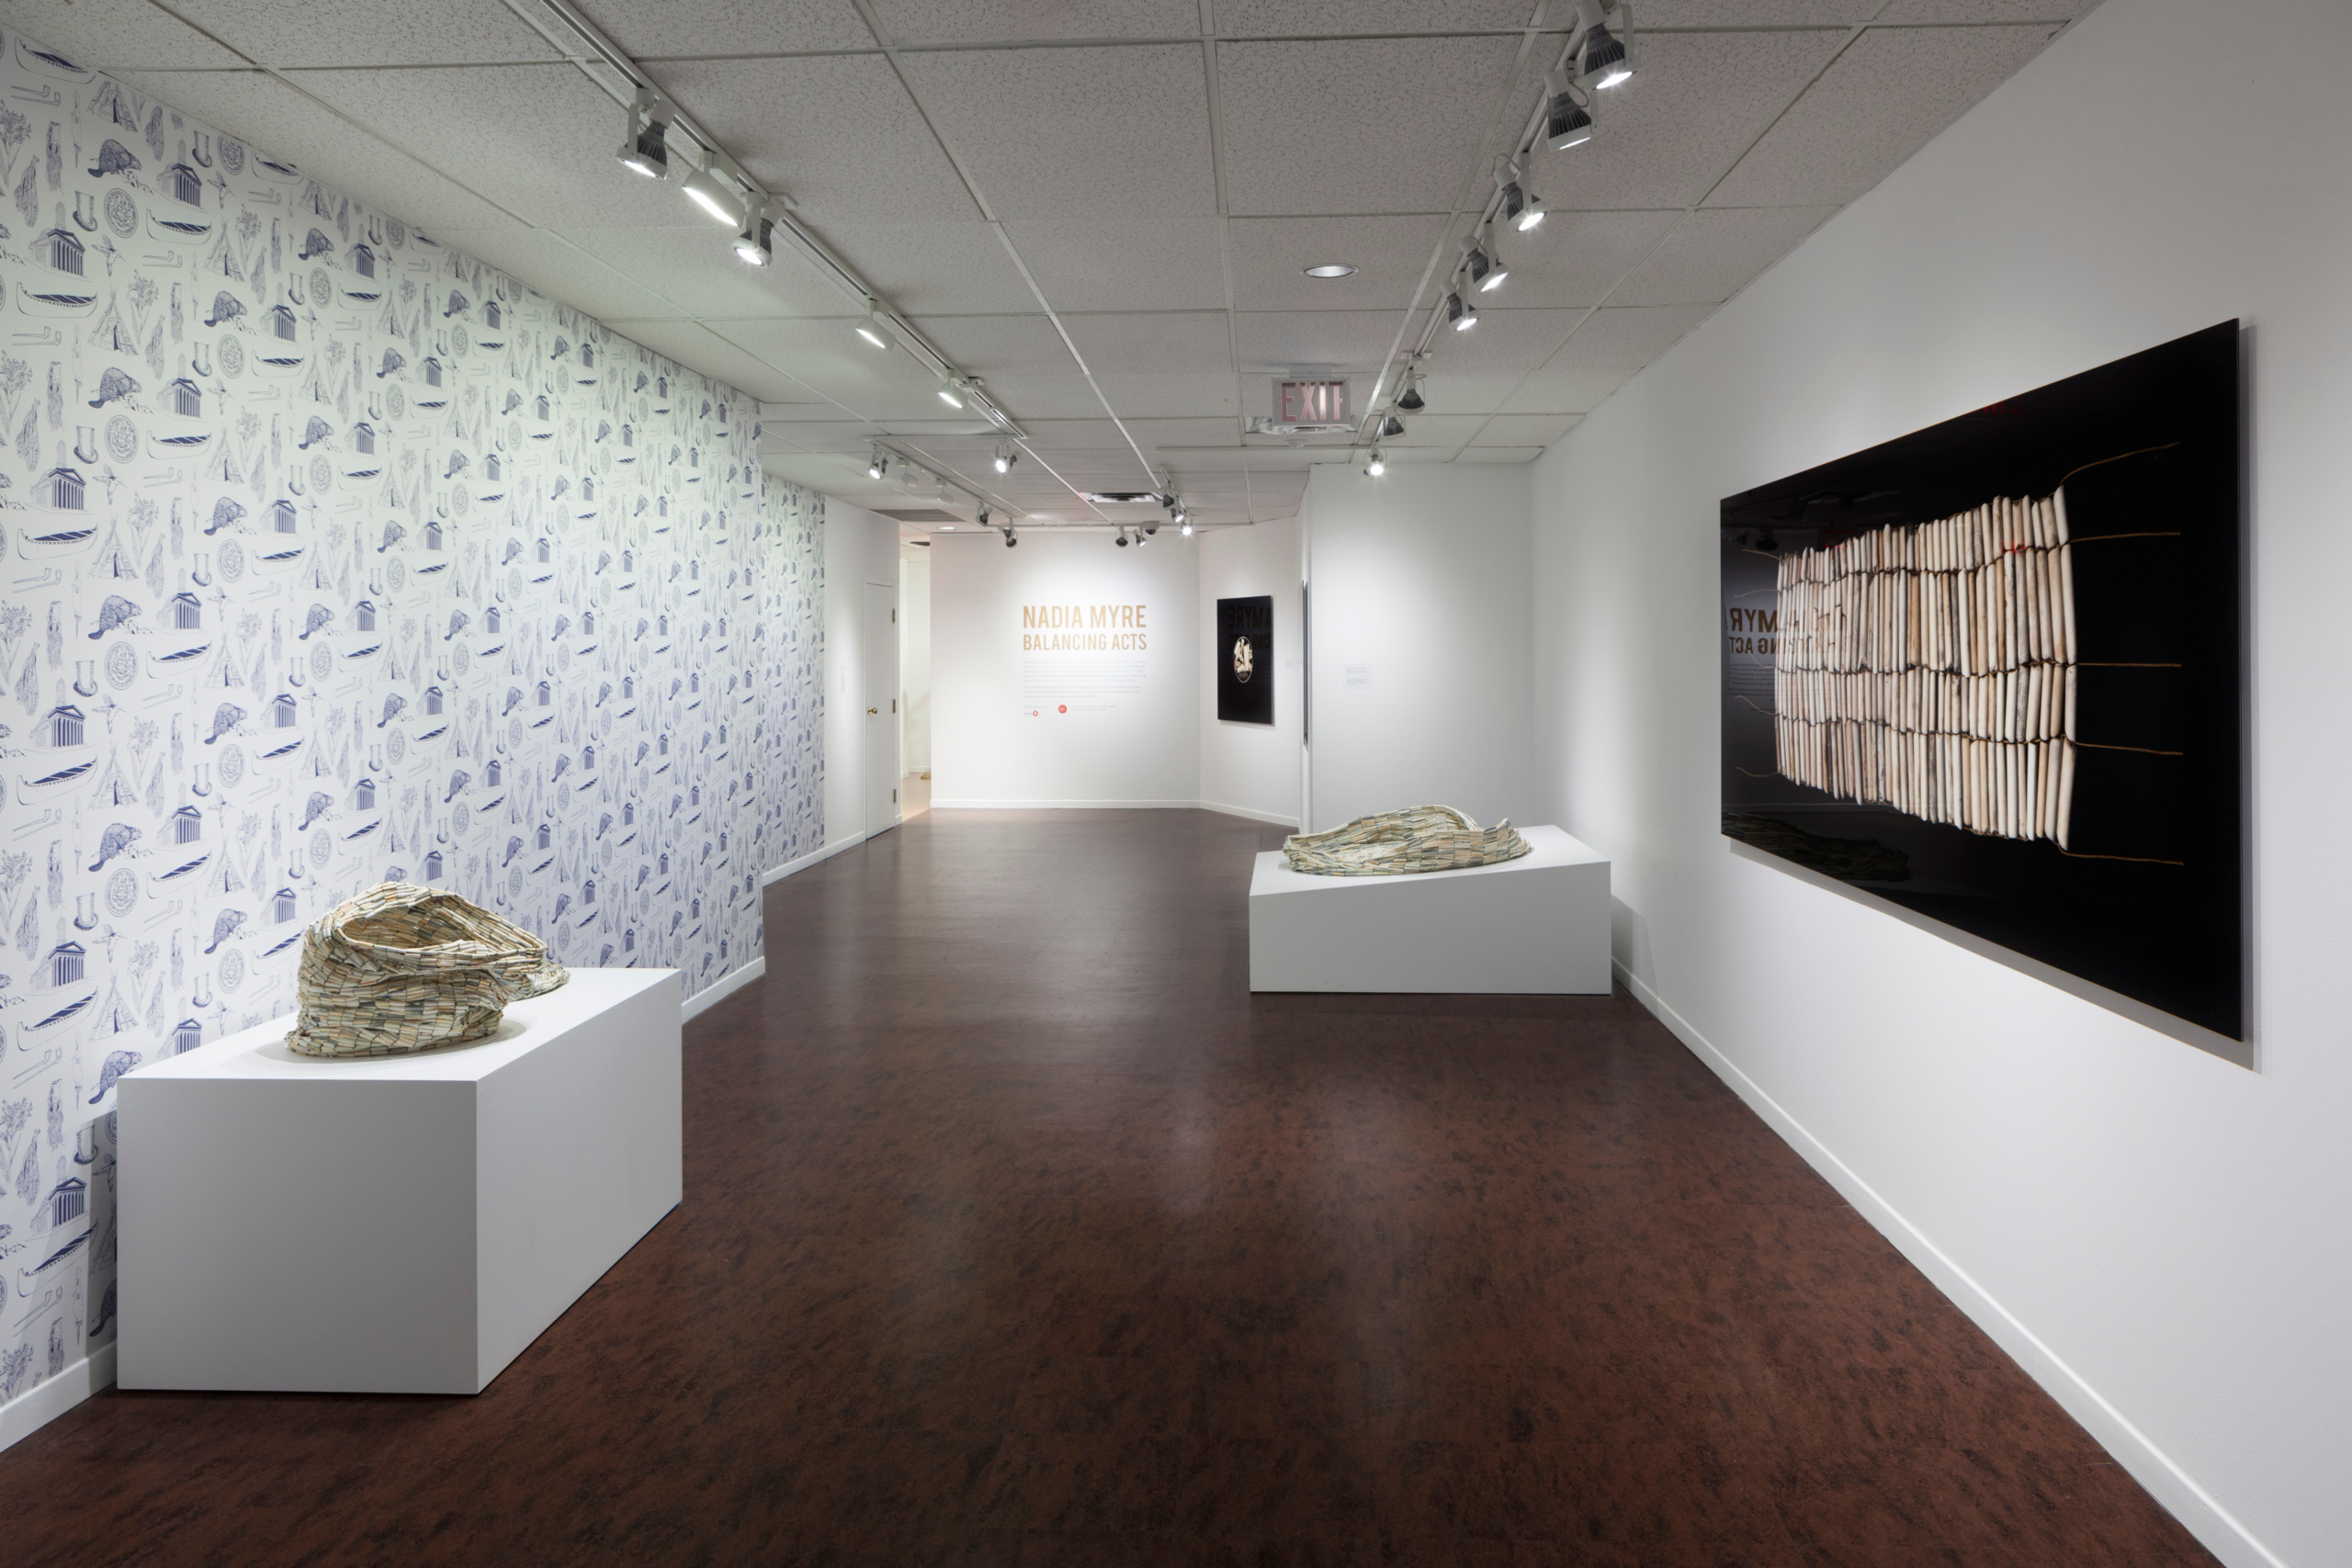     Installation view, Nadia Myre, Balancing Acts, Photo: Darren Rigo. Courtesy of the Textile Museum of Canada. 

